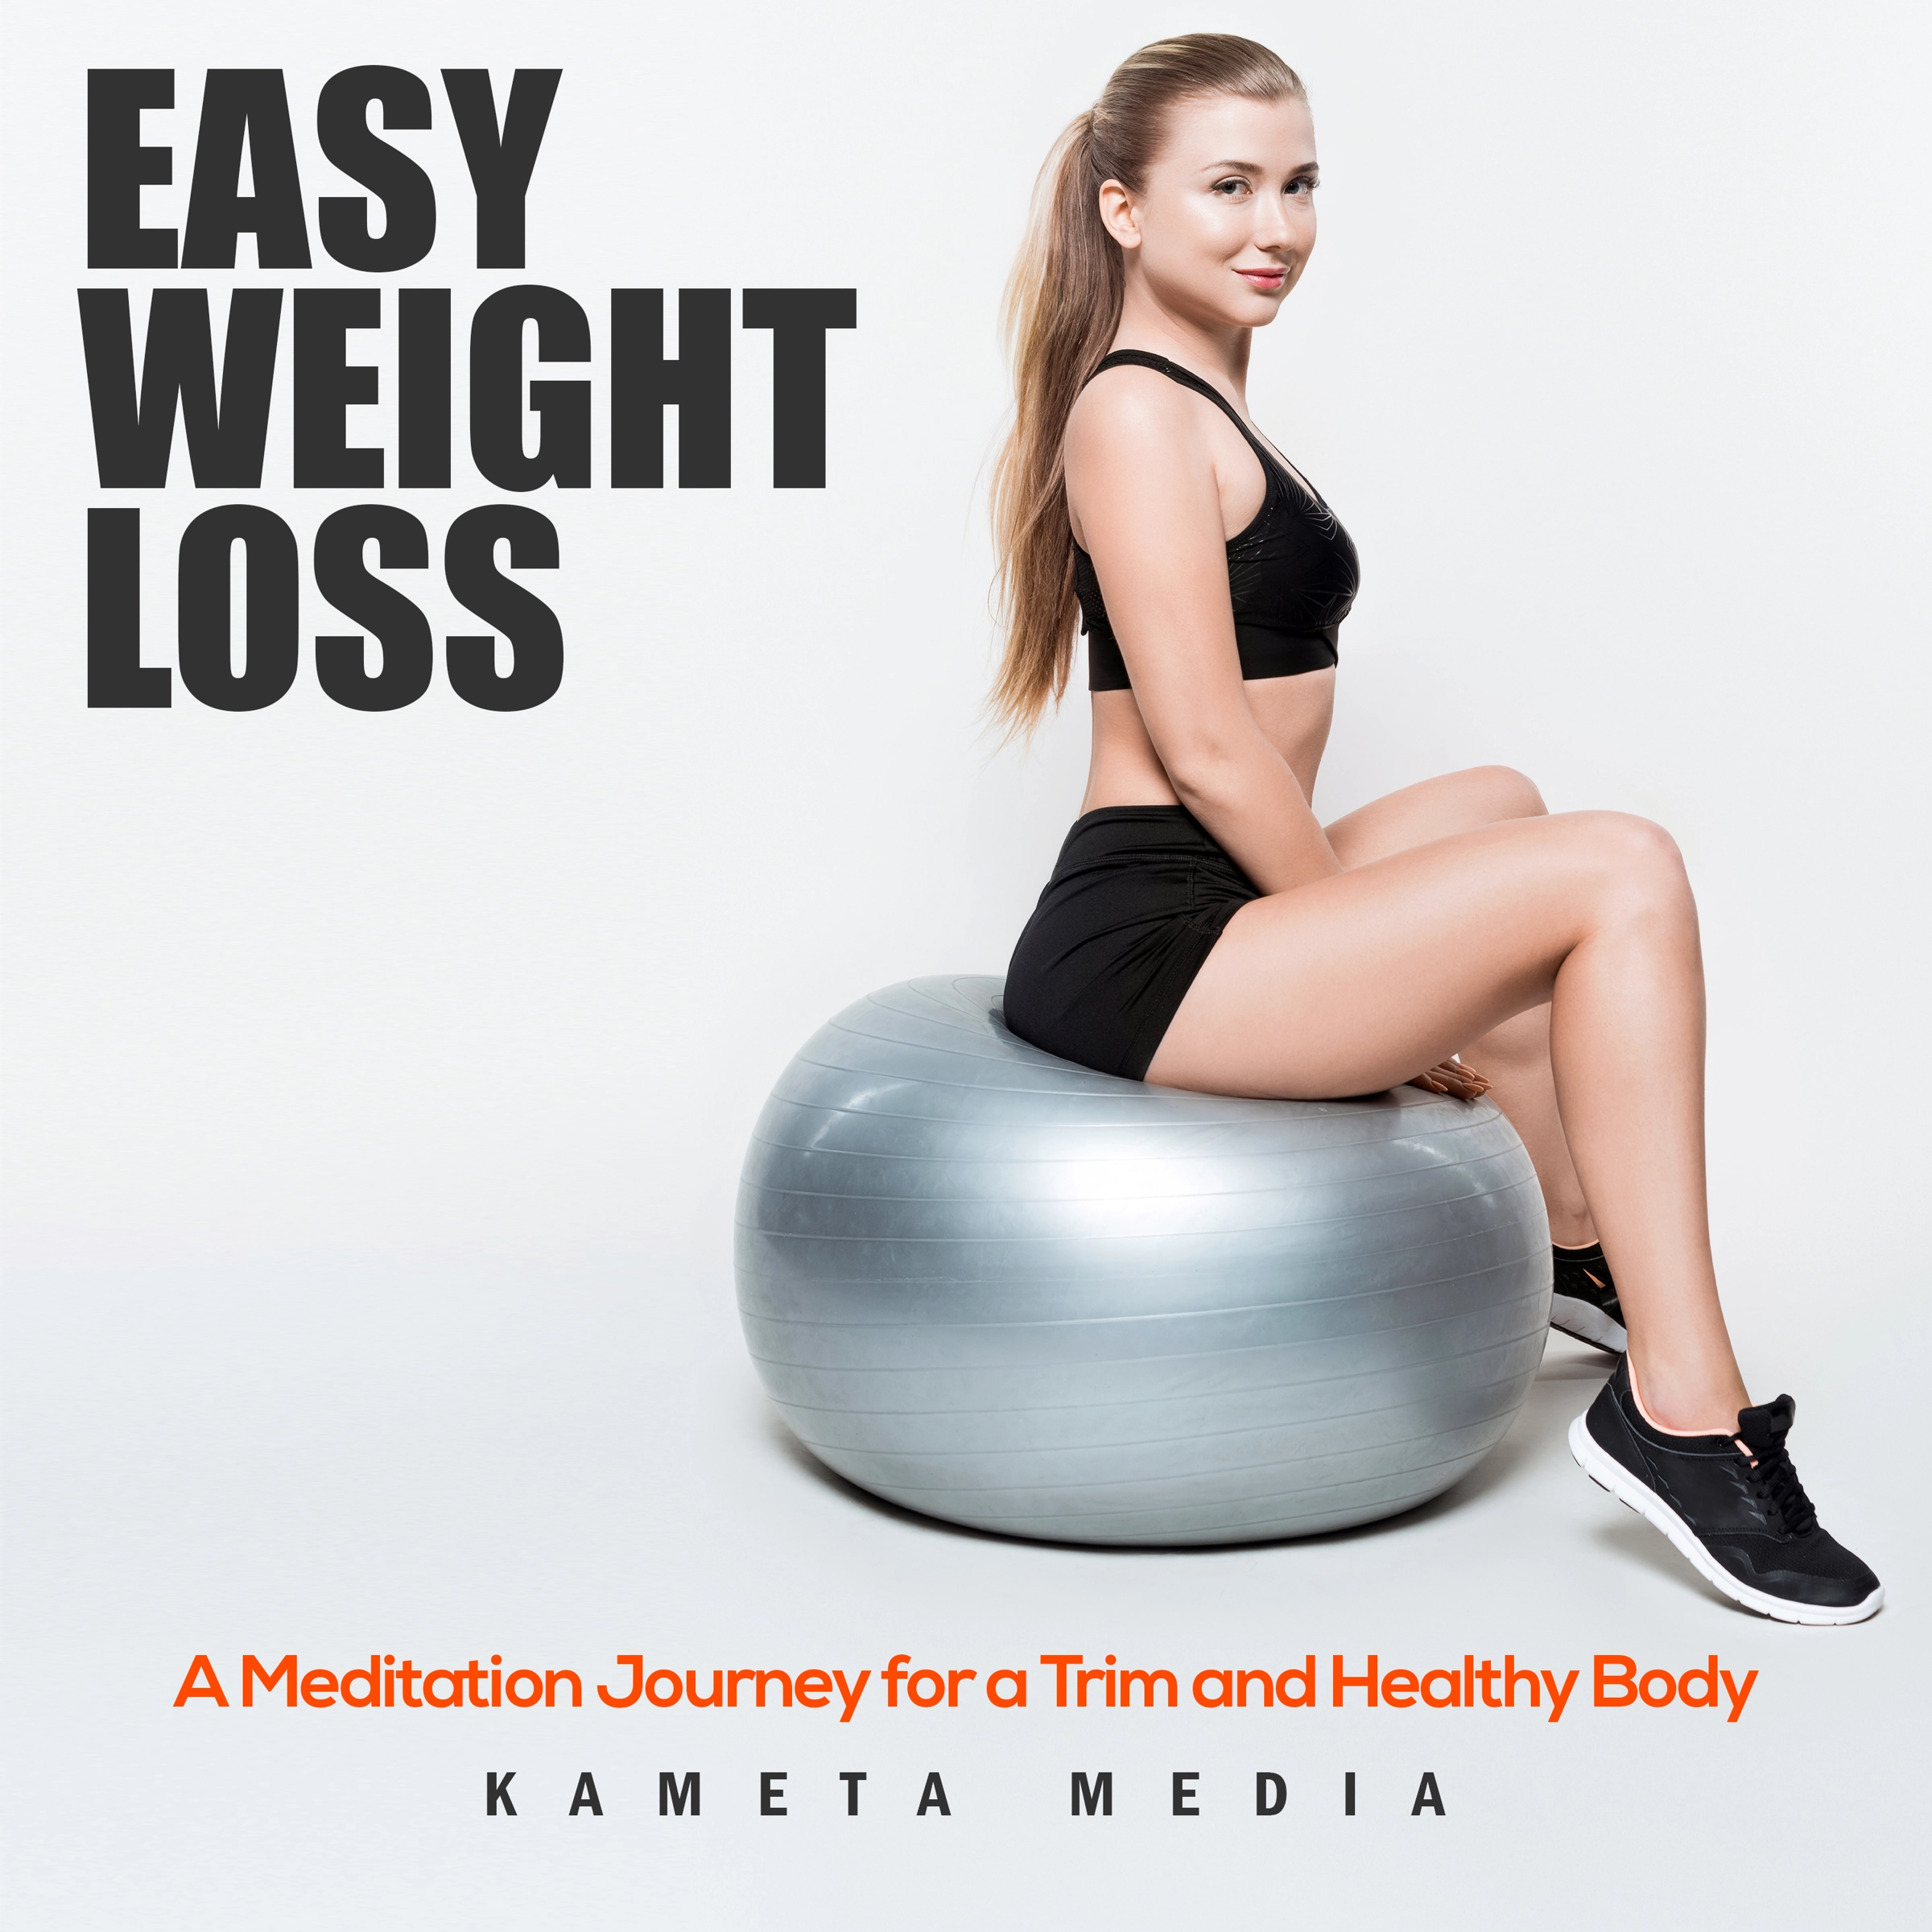 Easy Weight Loss: A Meditation Journey for a Trim and Healthy Body Audiobook by Kameta Media